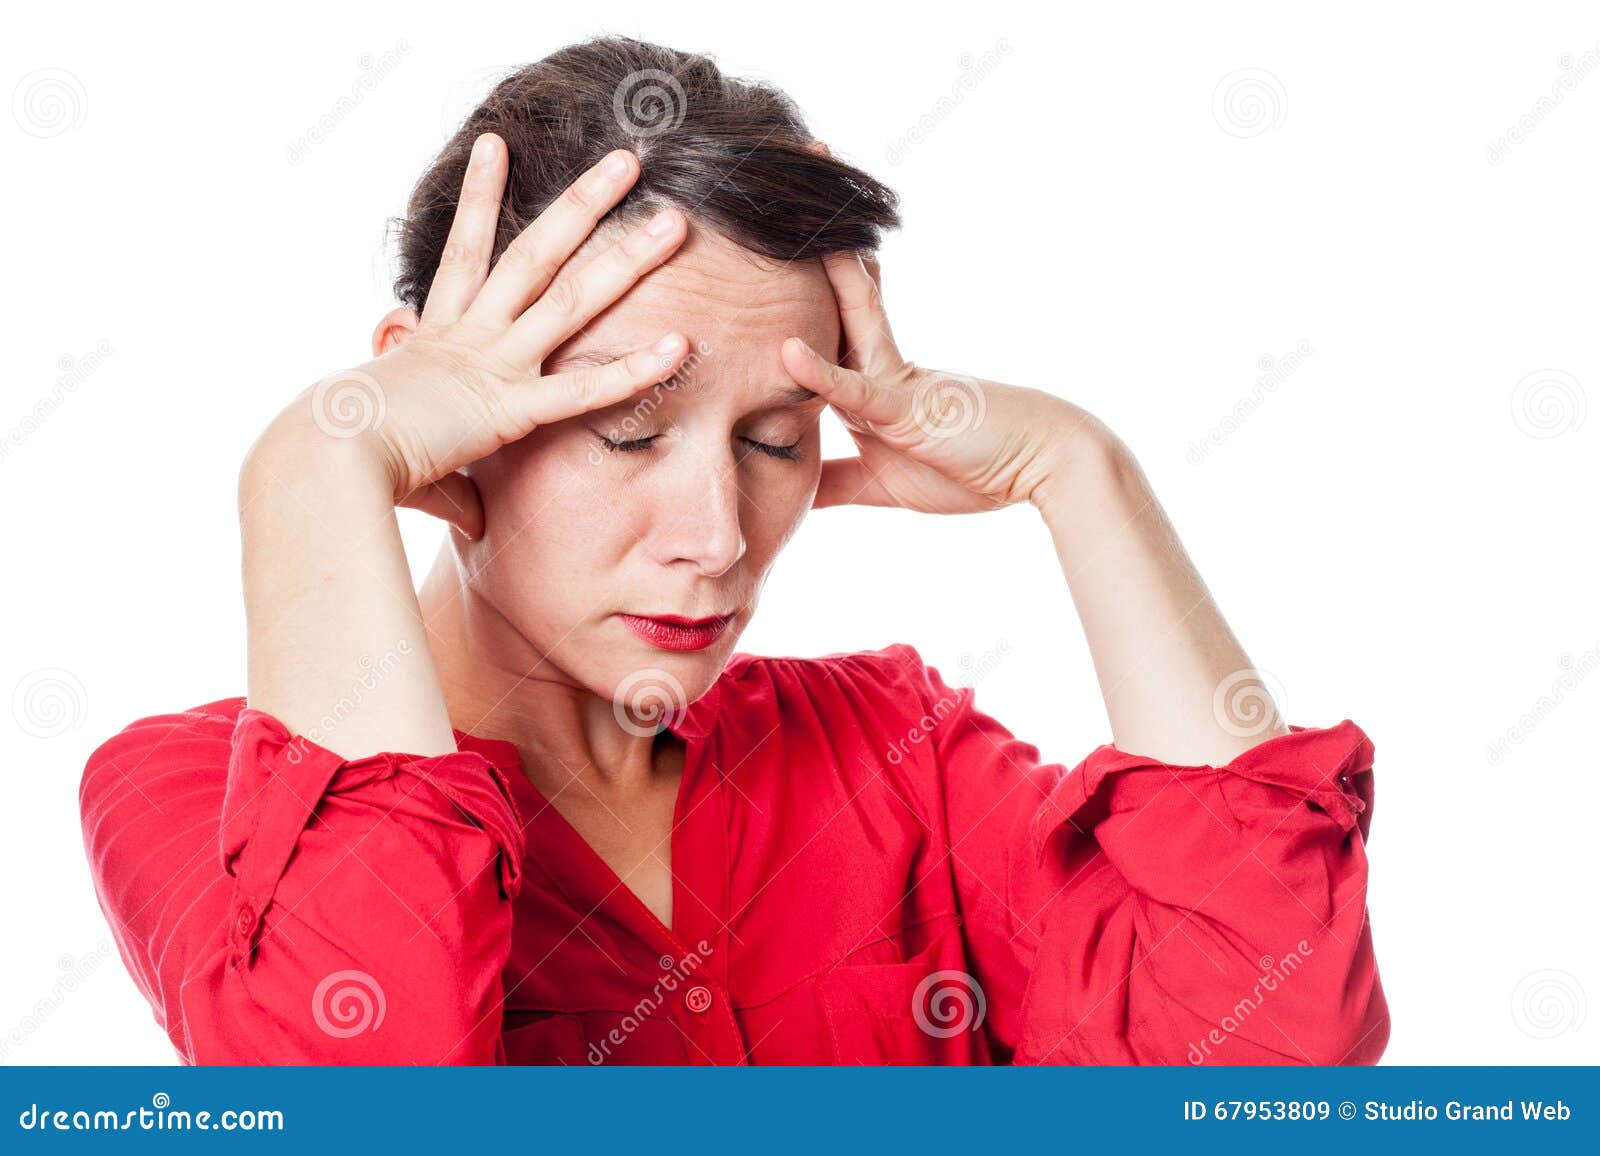 exasperated young woman with exhaustion for headache